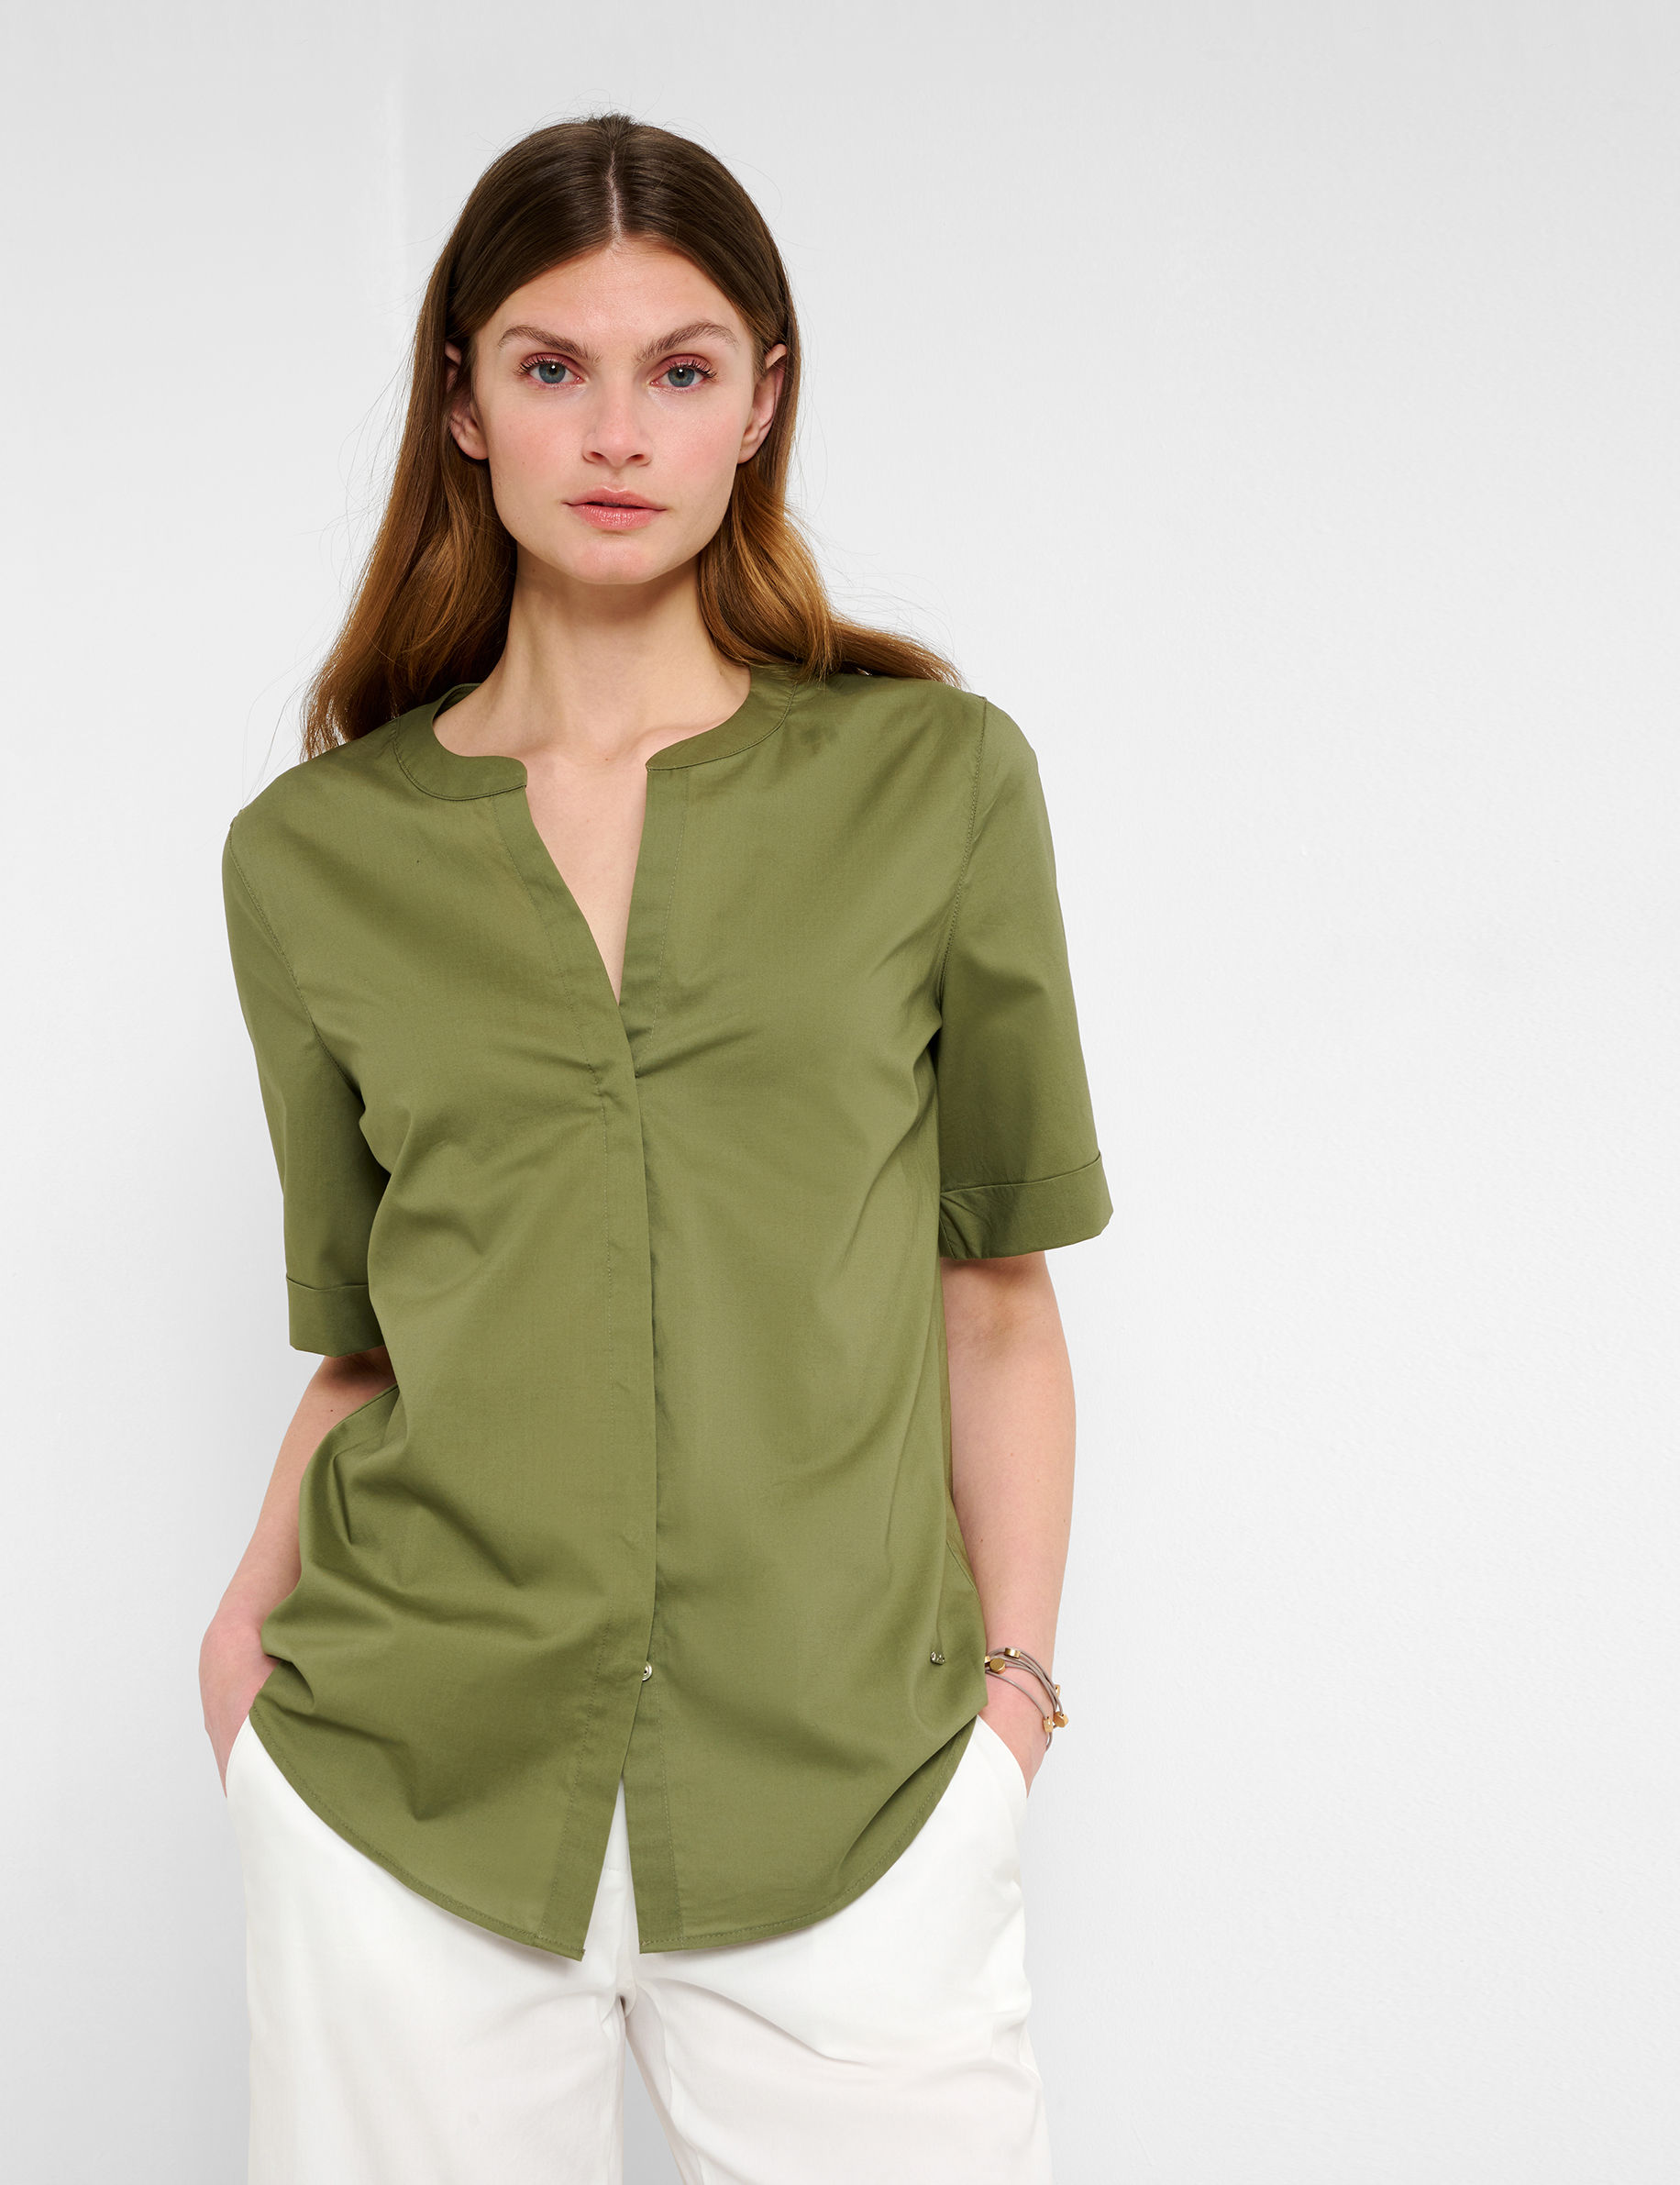 Shades of green, Women, Style VERI, MODEL_FRONT_ISHOP